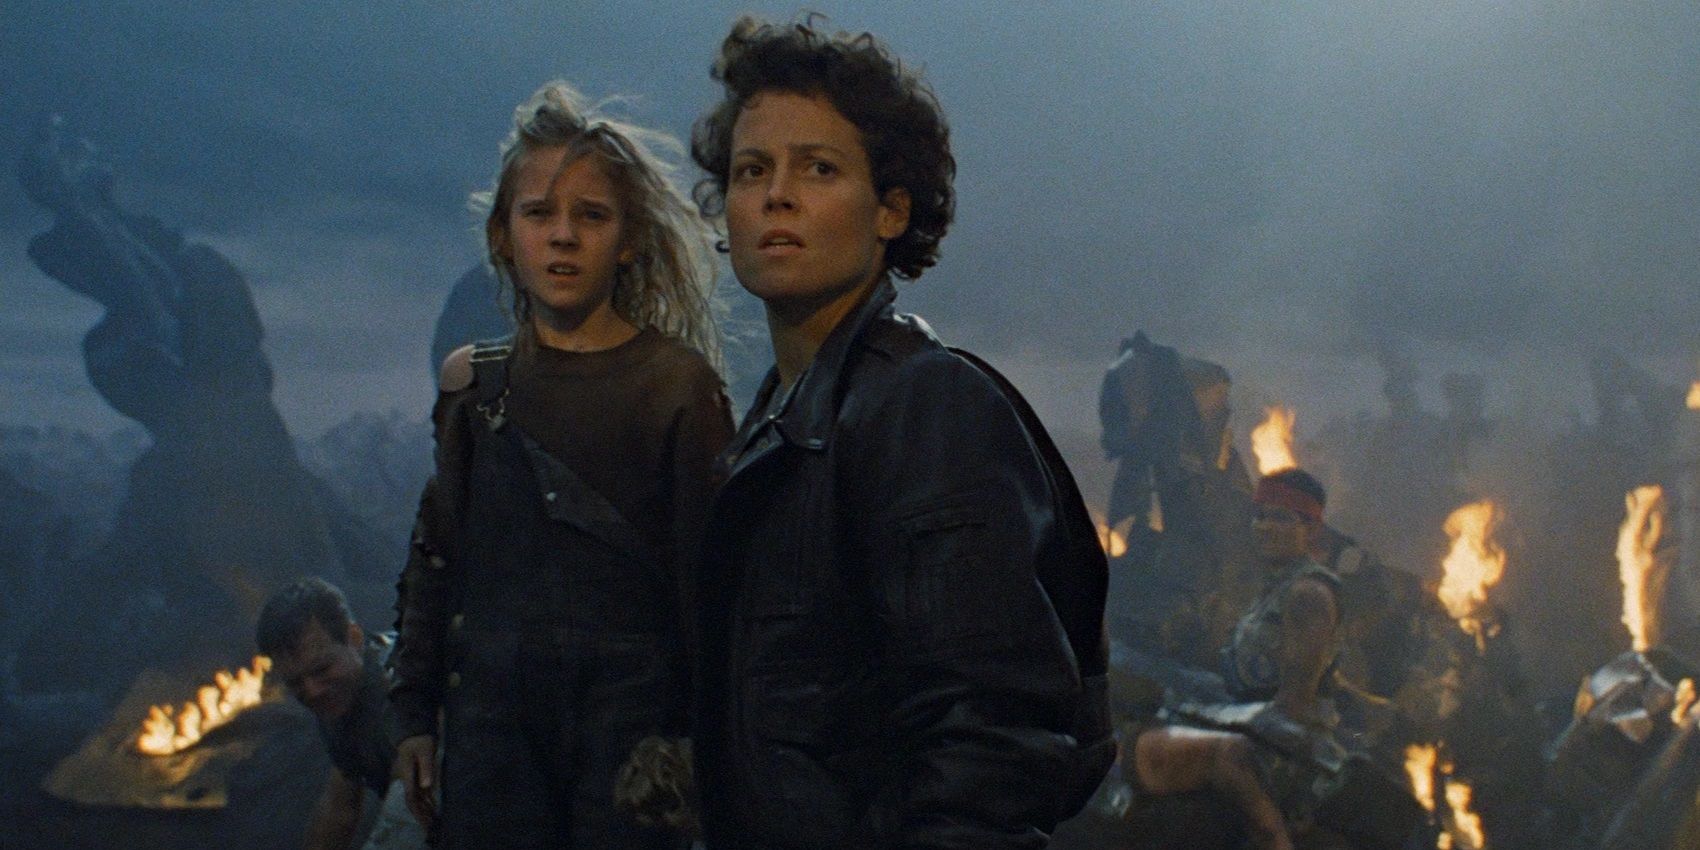 Ripley_and_Newt_stand_before_wreckage_in_Aliens